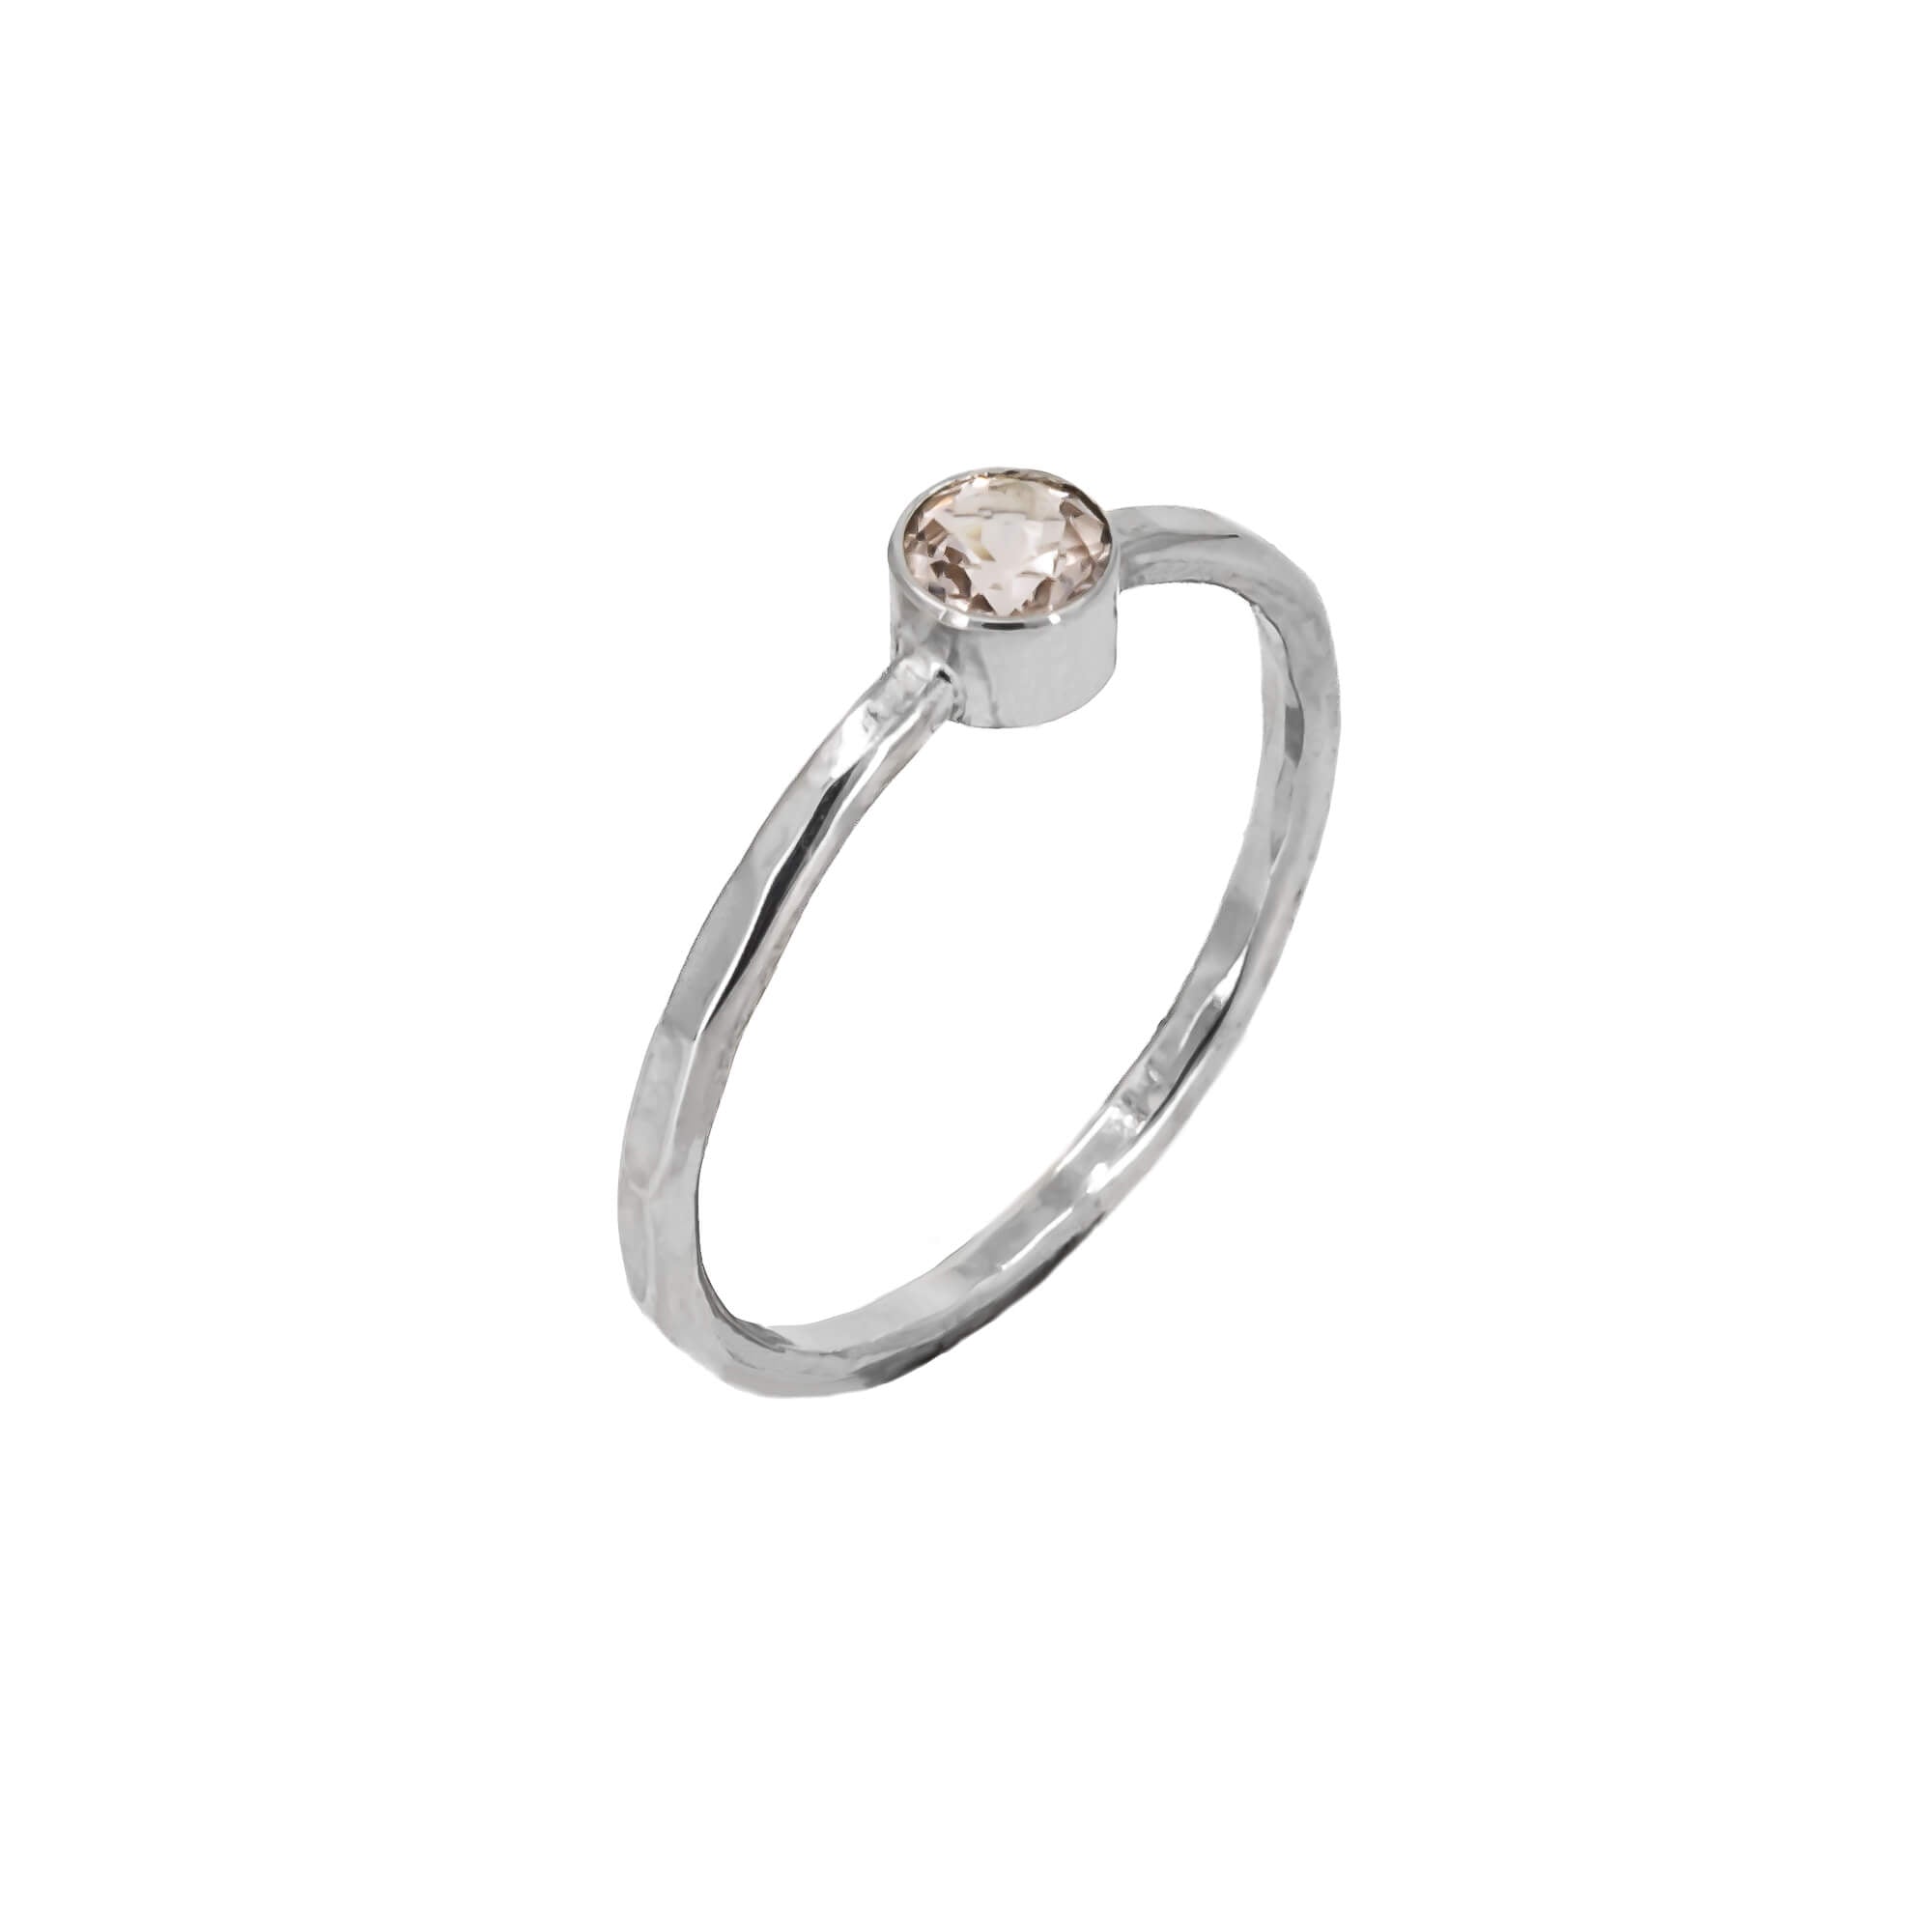 Faceted Morganite stackable ring in sterling silver with a textured band